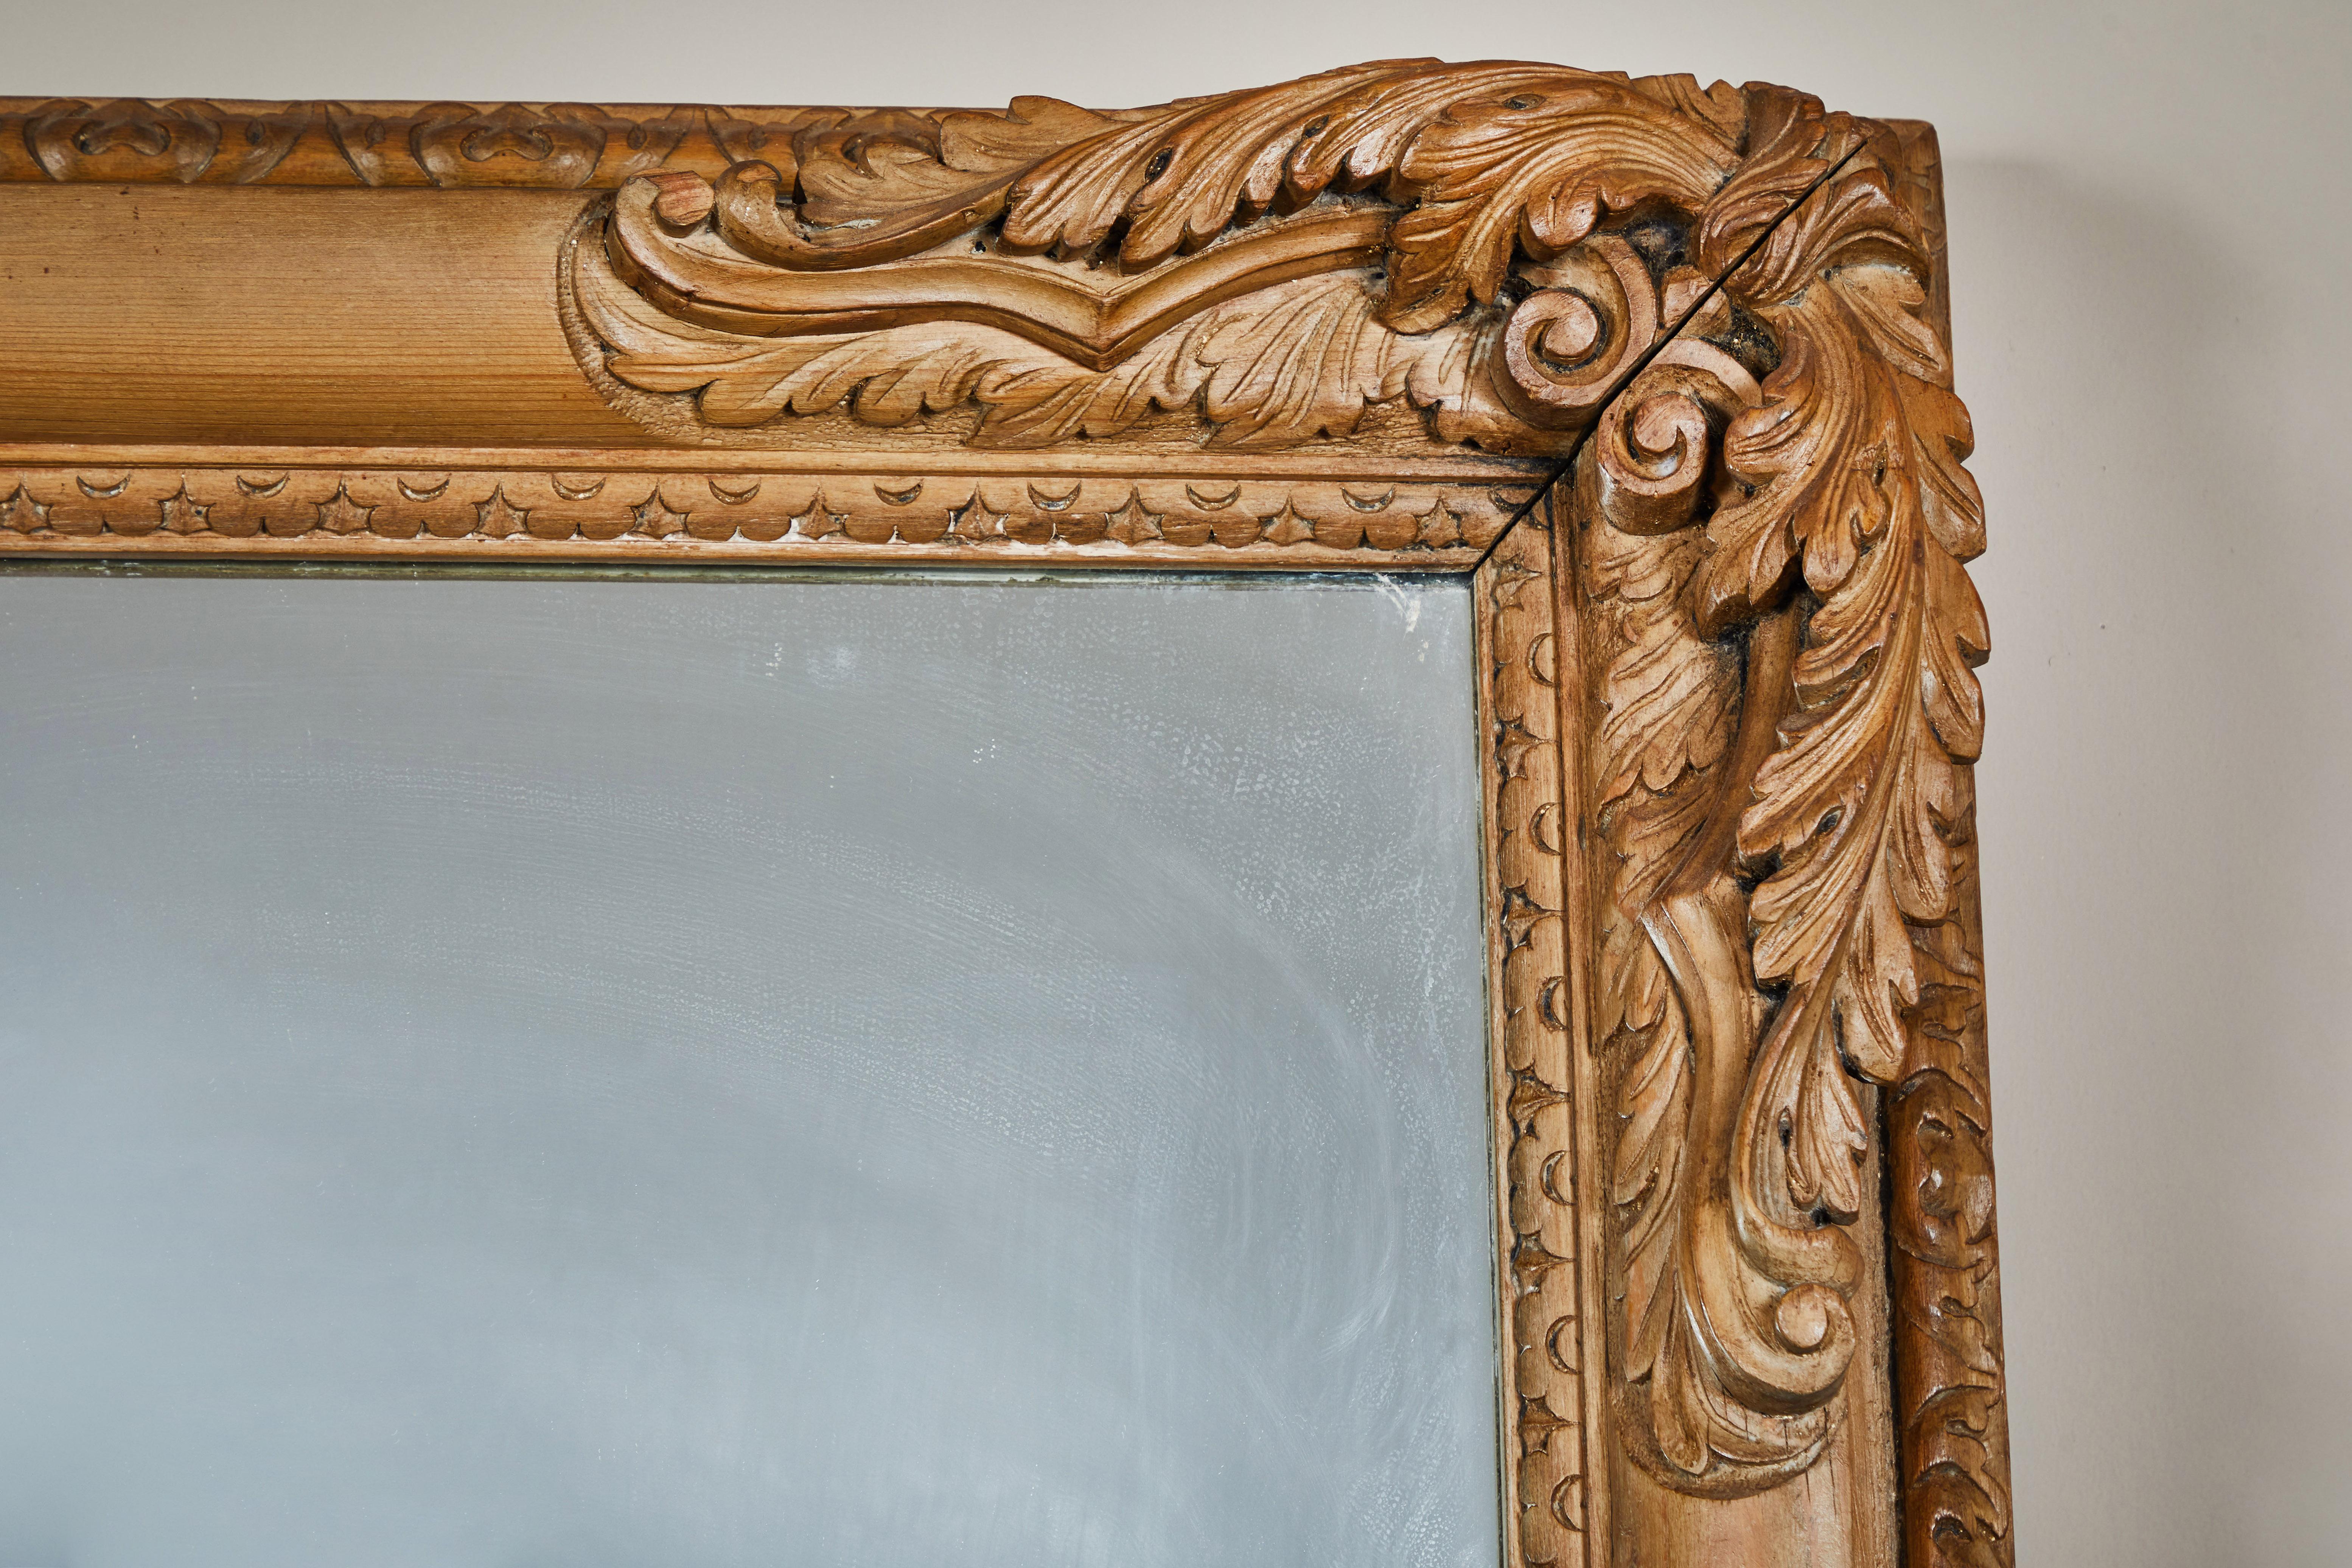 A large, light wood framed mirror with heavily-carved corners. Great scale as floor-leaning mirror, or mounted low in foyer, dressing room, etc.